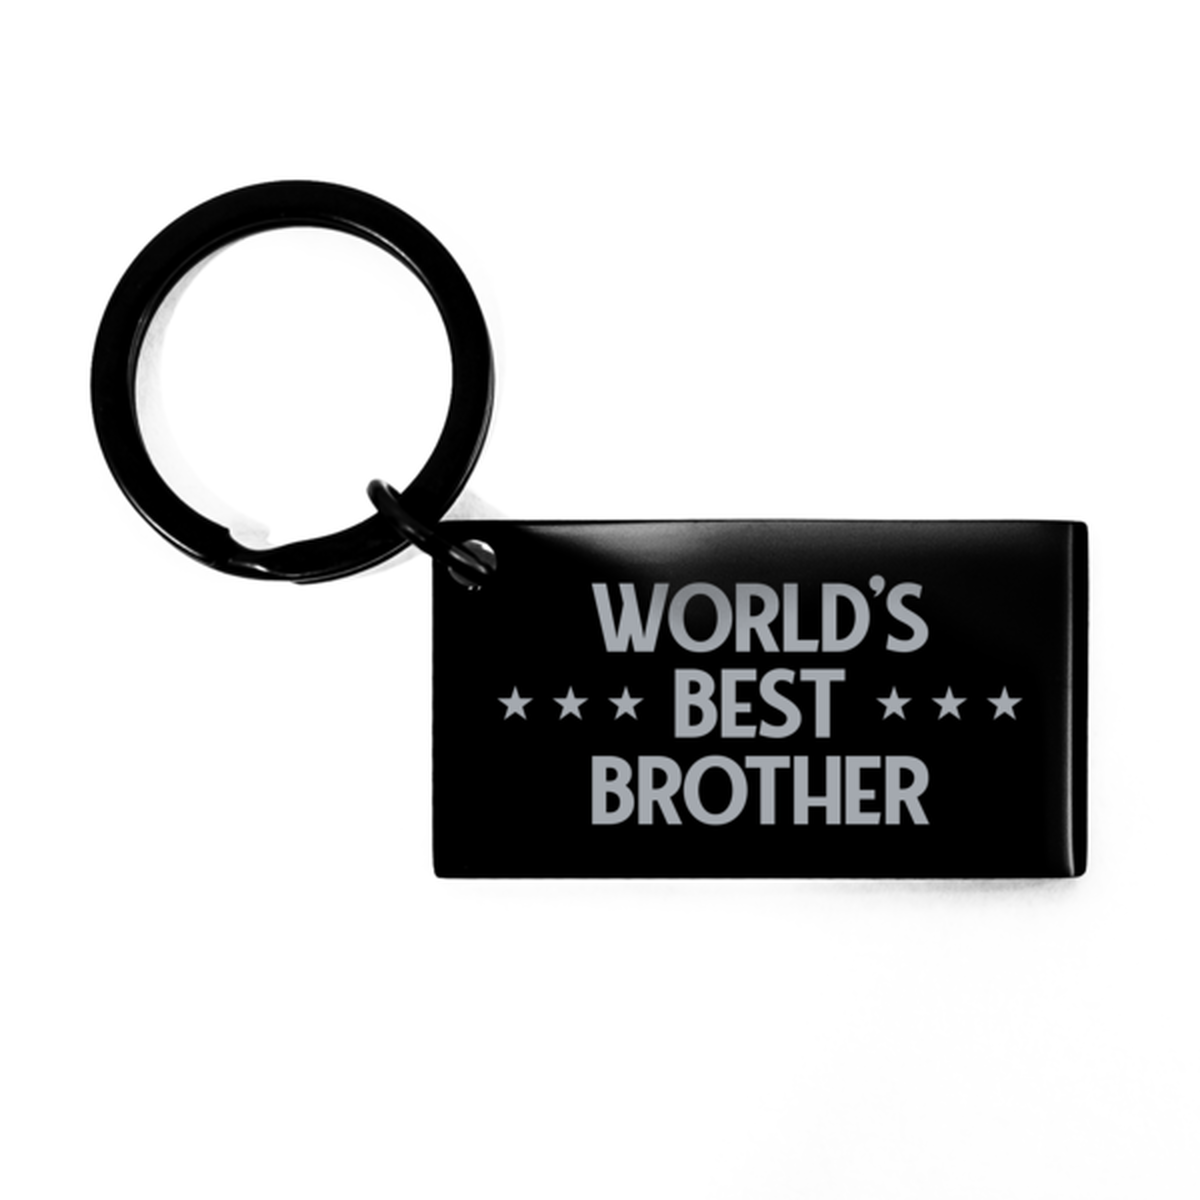 Worlds Best Brother Gifts, Funny Black Engraved Keychain For Brother, Birthday Presents For Men